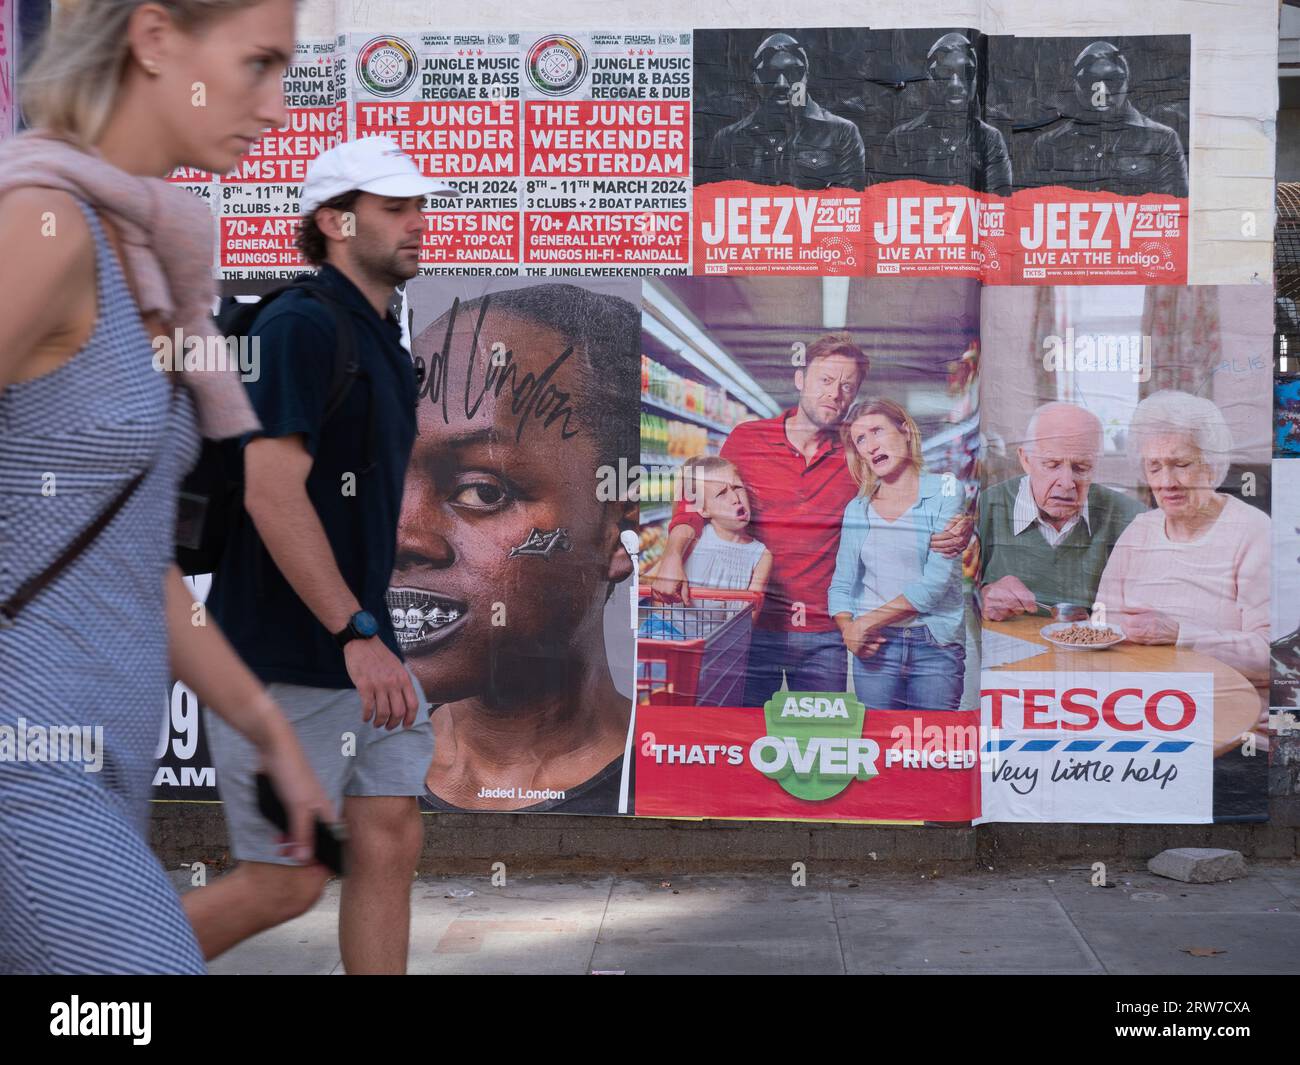 Cost of Living crisis UK. People walking past a protest advert for Tesco and Asda, demonstrating the high profits  supermarkets are making during the cost of living crisis. Type on spoof adverts read Tesco very little help, and Asda that's over priced Stock Photo